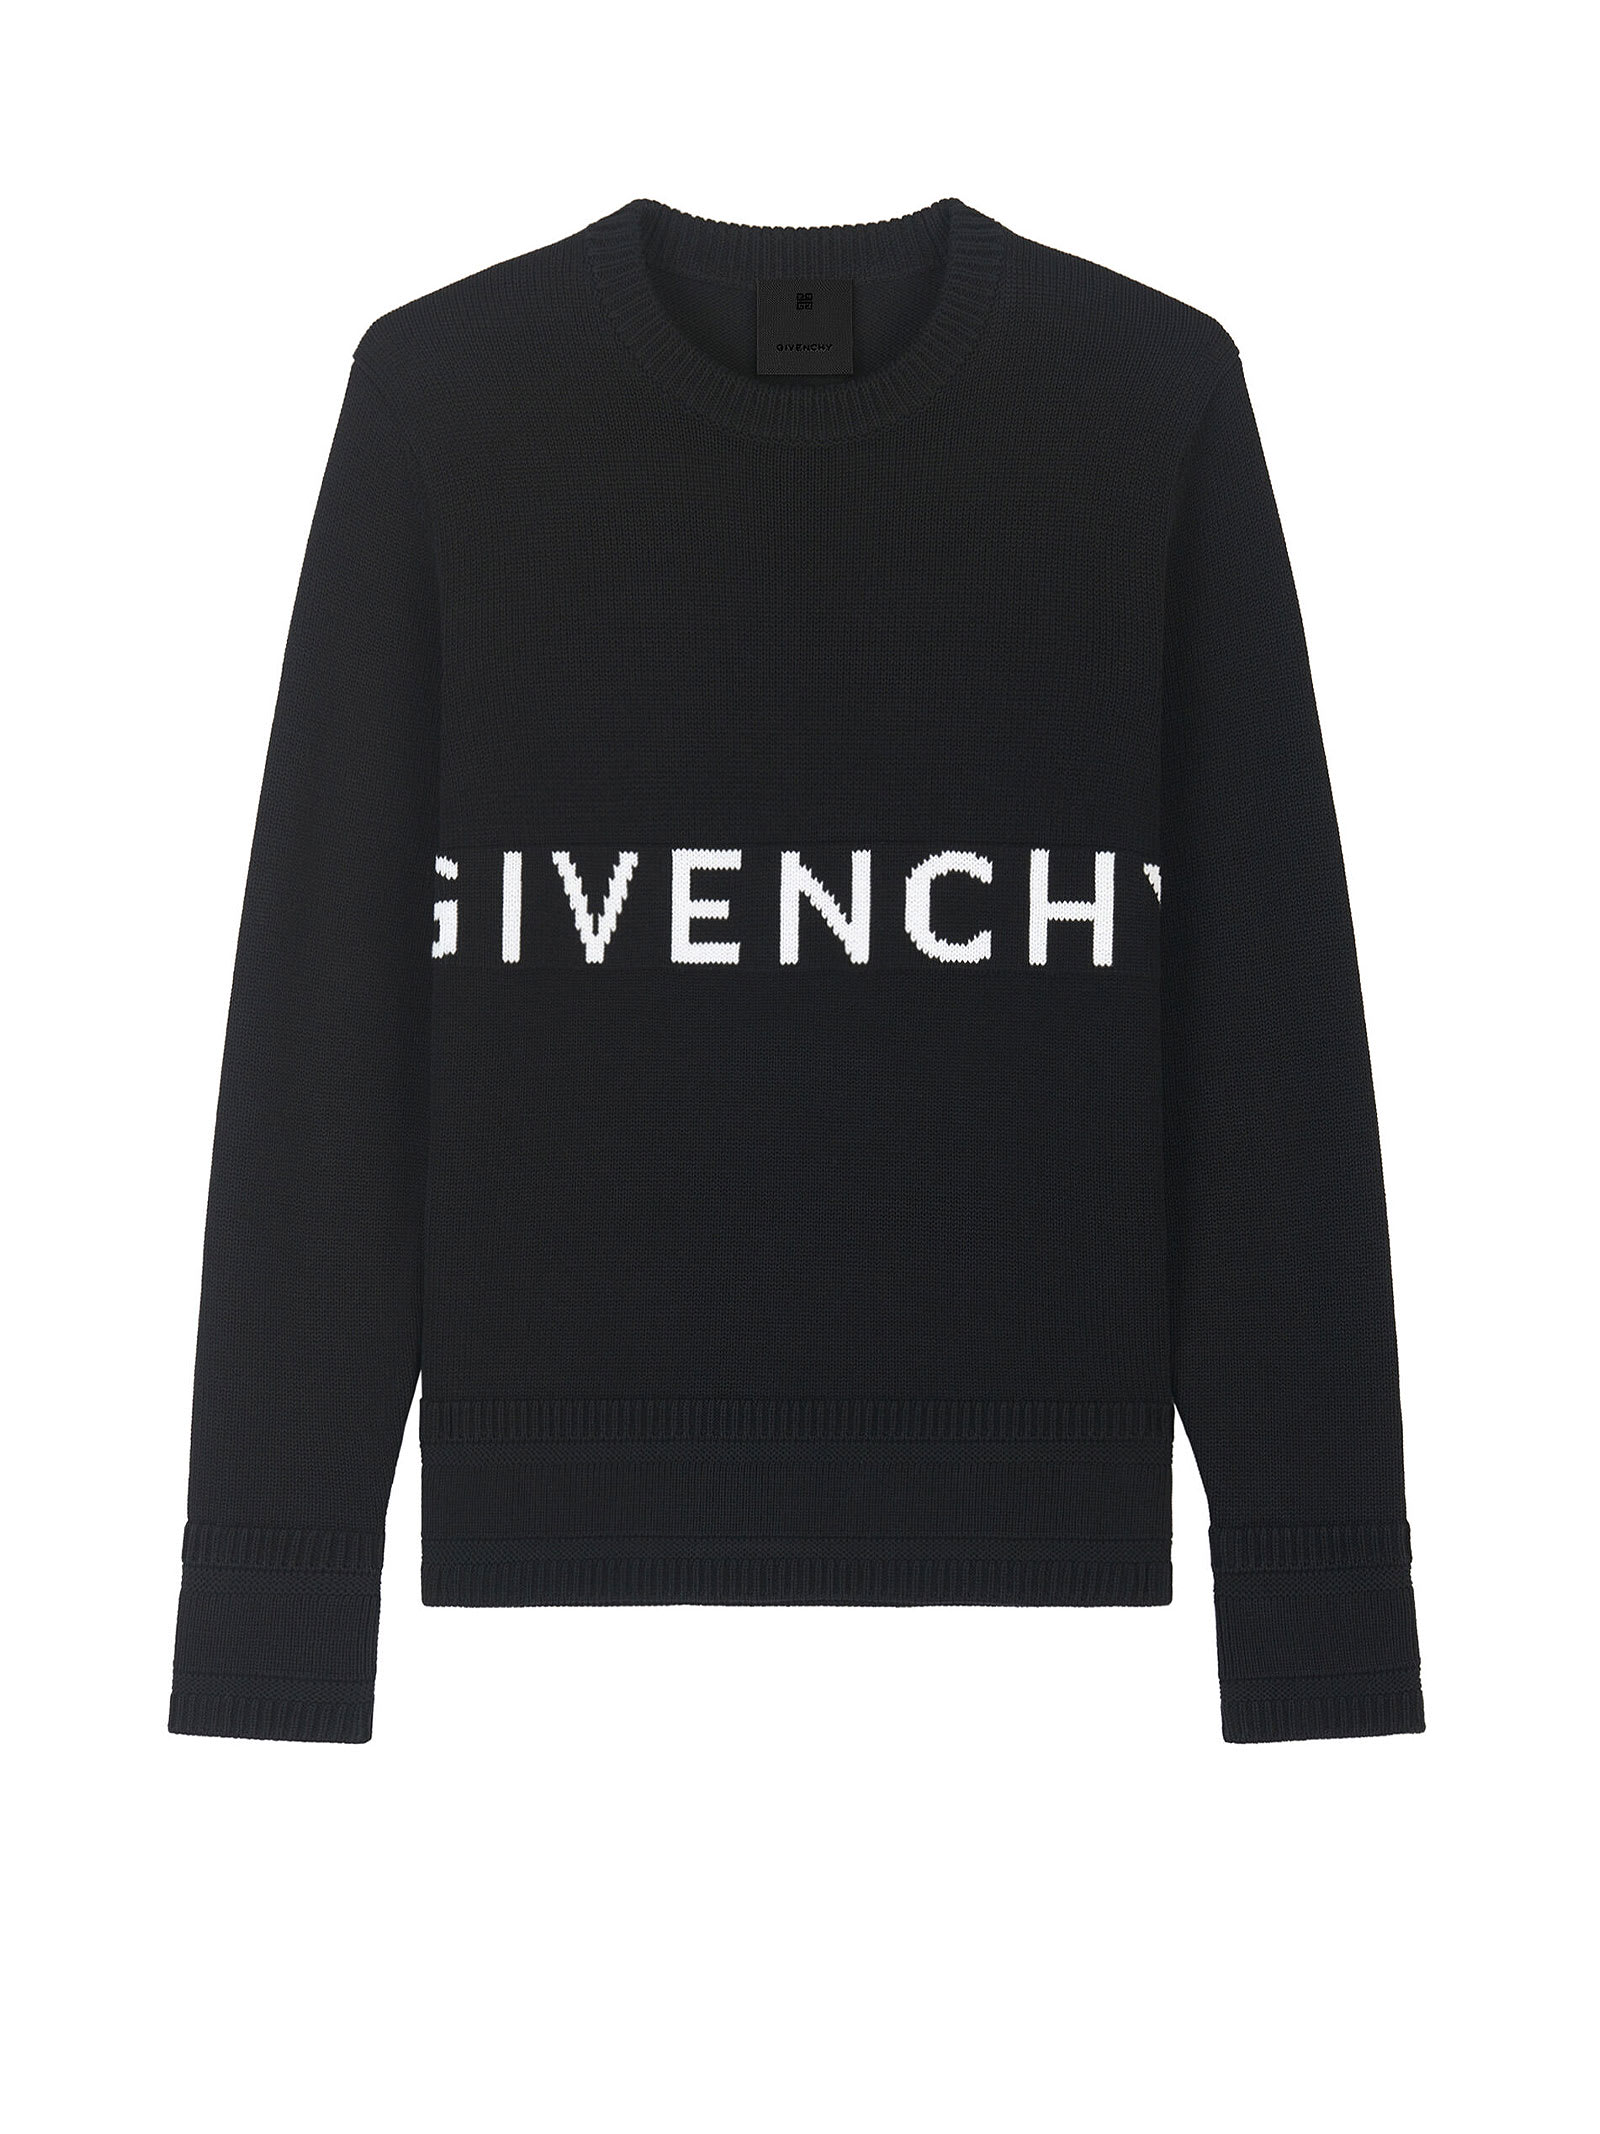 Givenchy Sweater In Black Cotton